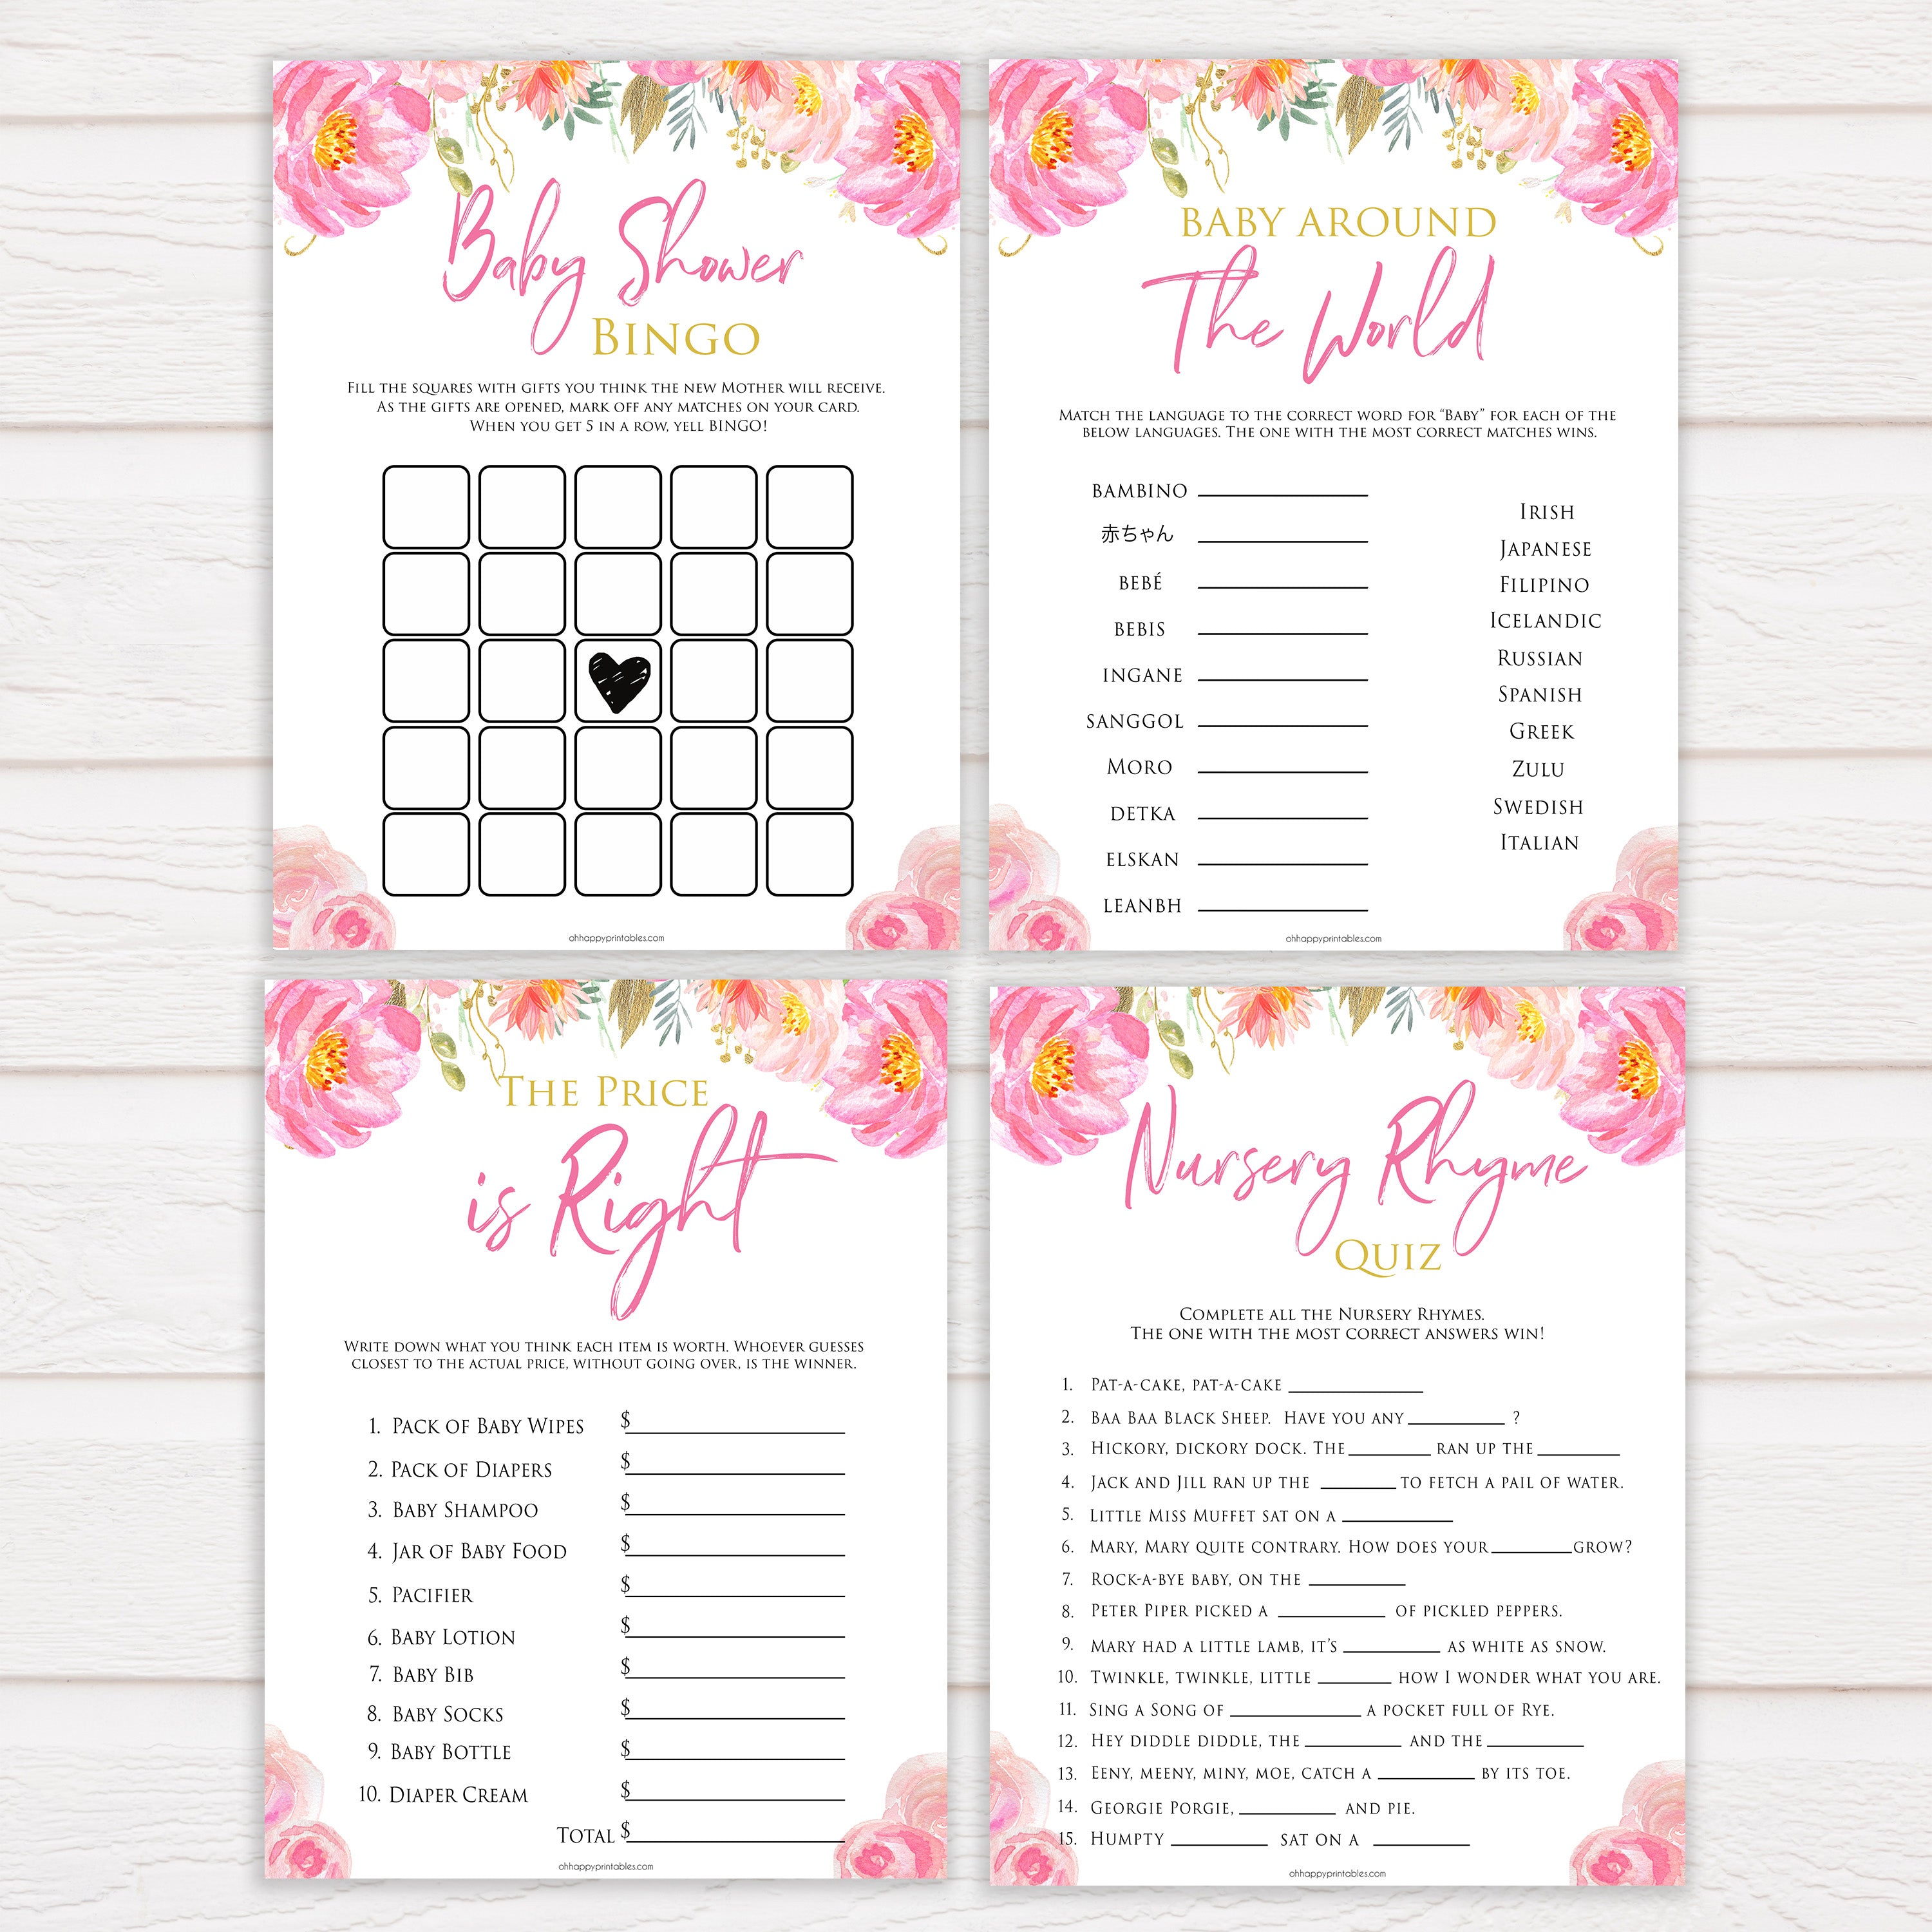 Pink blush floral baby shower games, 7 baby shower games, baby games bundle, printable baby games, baby shower games, blush baby shower, floral baby games, girl baby shower ideas, pink baby shower ideas, floral baby games, popular baby games, fun baby games